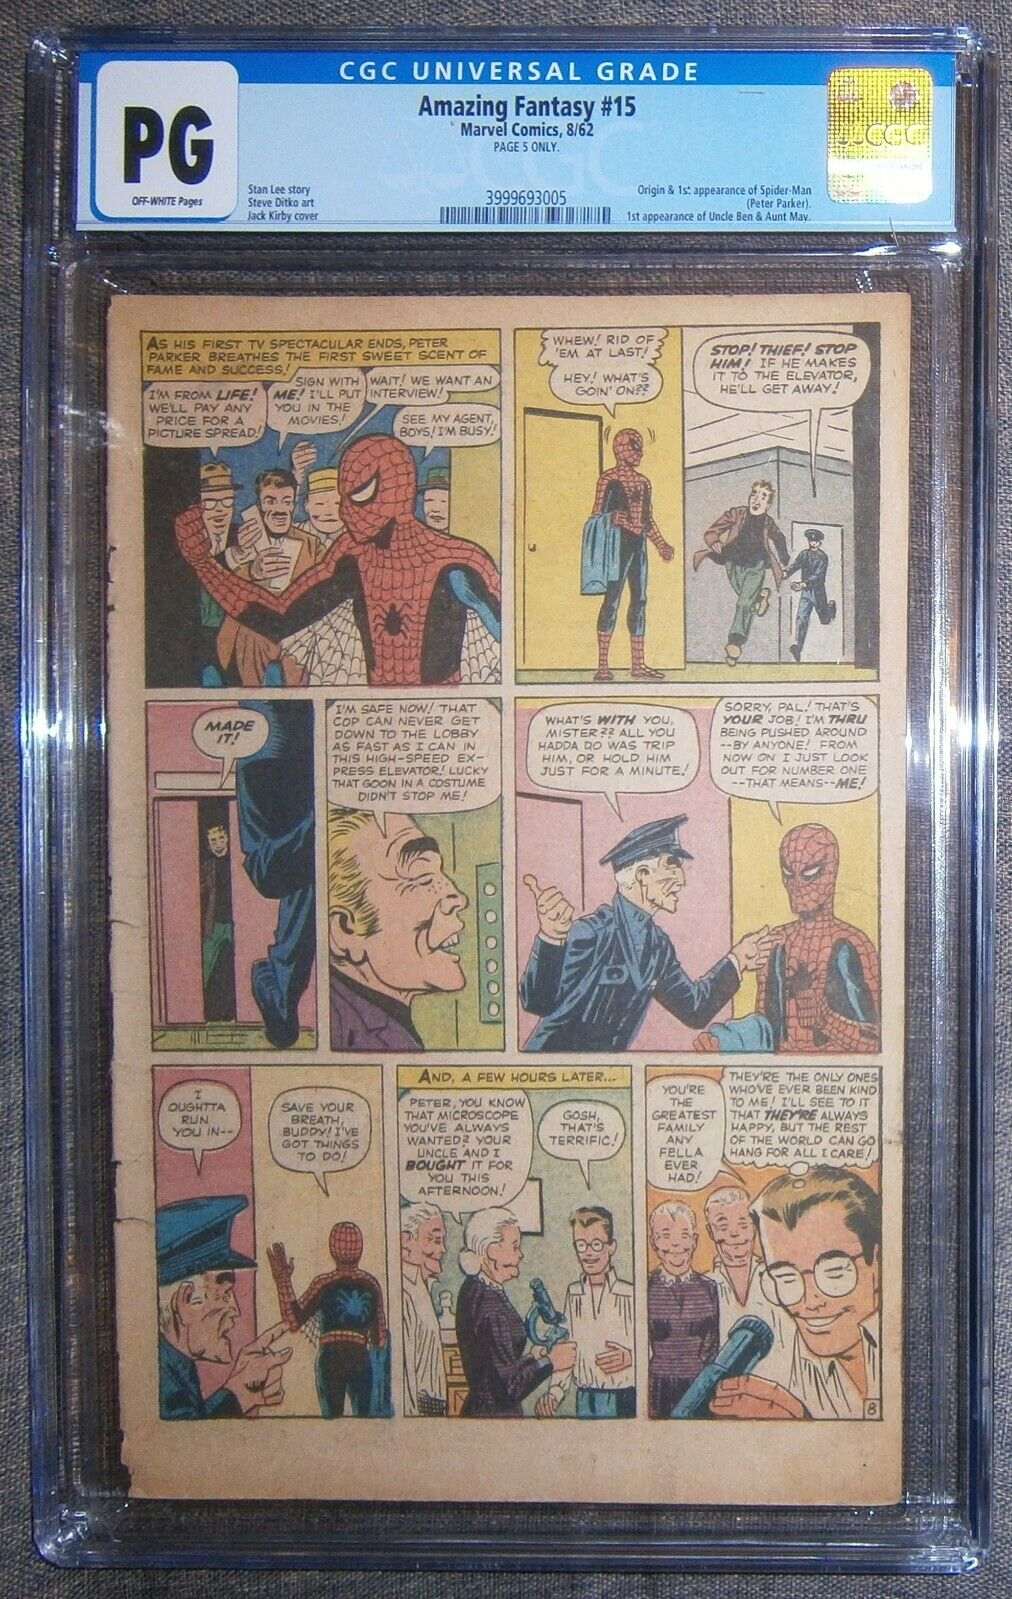 Amazing Fantasy 15 CGC PG 5   Page 5 only  Death of Uncle Ben